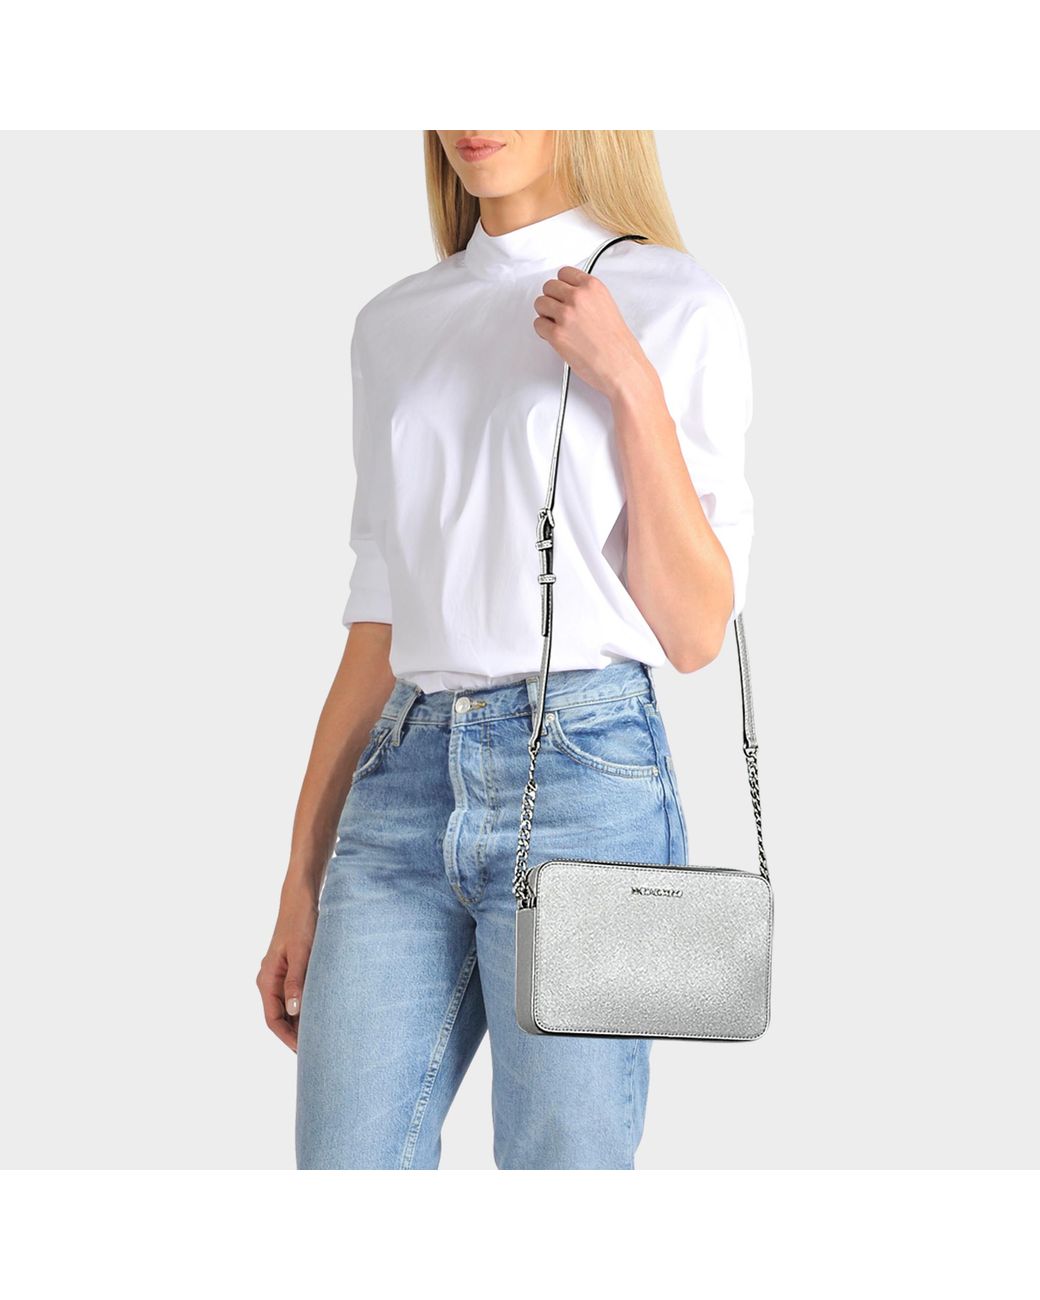 MICHAEL Michael Kors Large East-west Crossbody Bag In Silver Metallic  Saffiano Leather in Gray